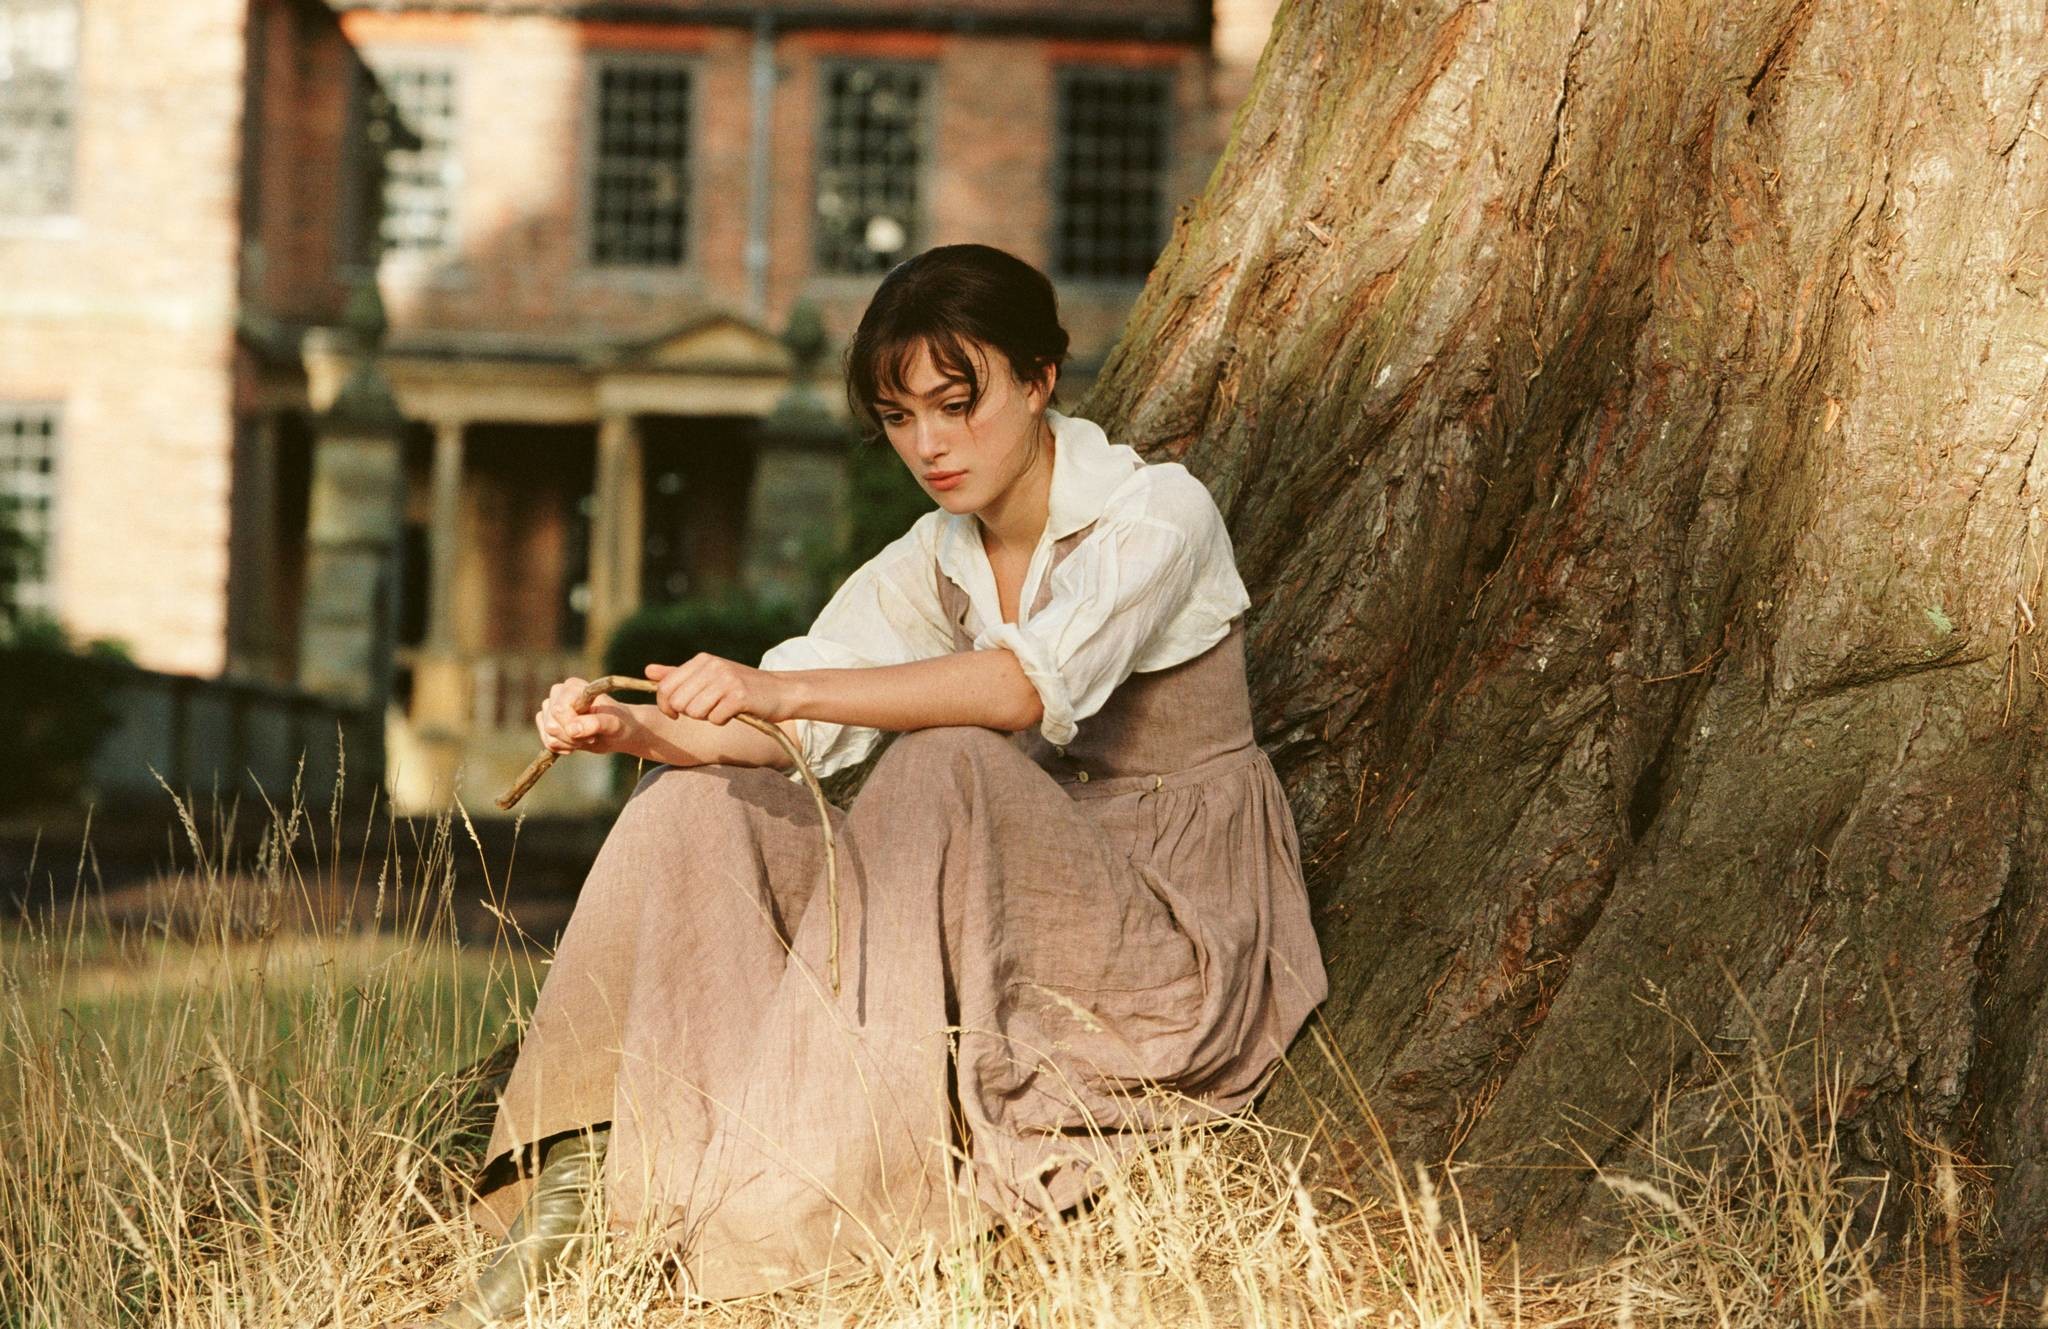 pride and prejudice wallpaper,tree,sitting,grass,photography,plant